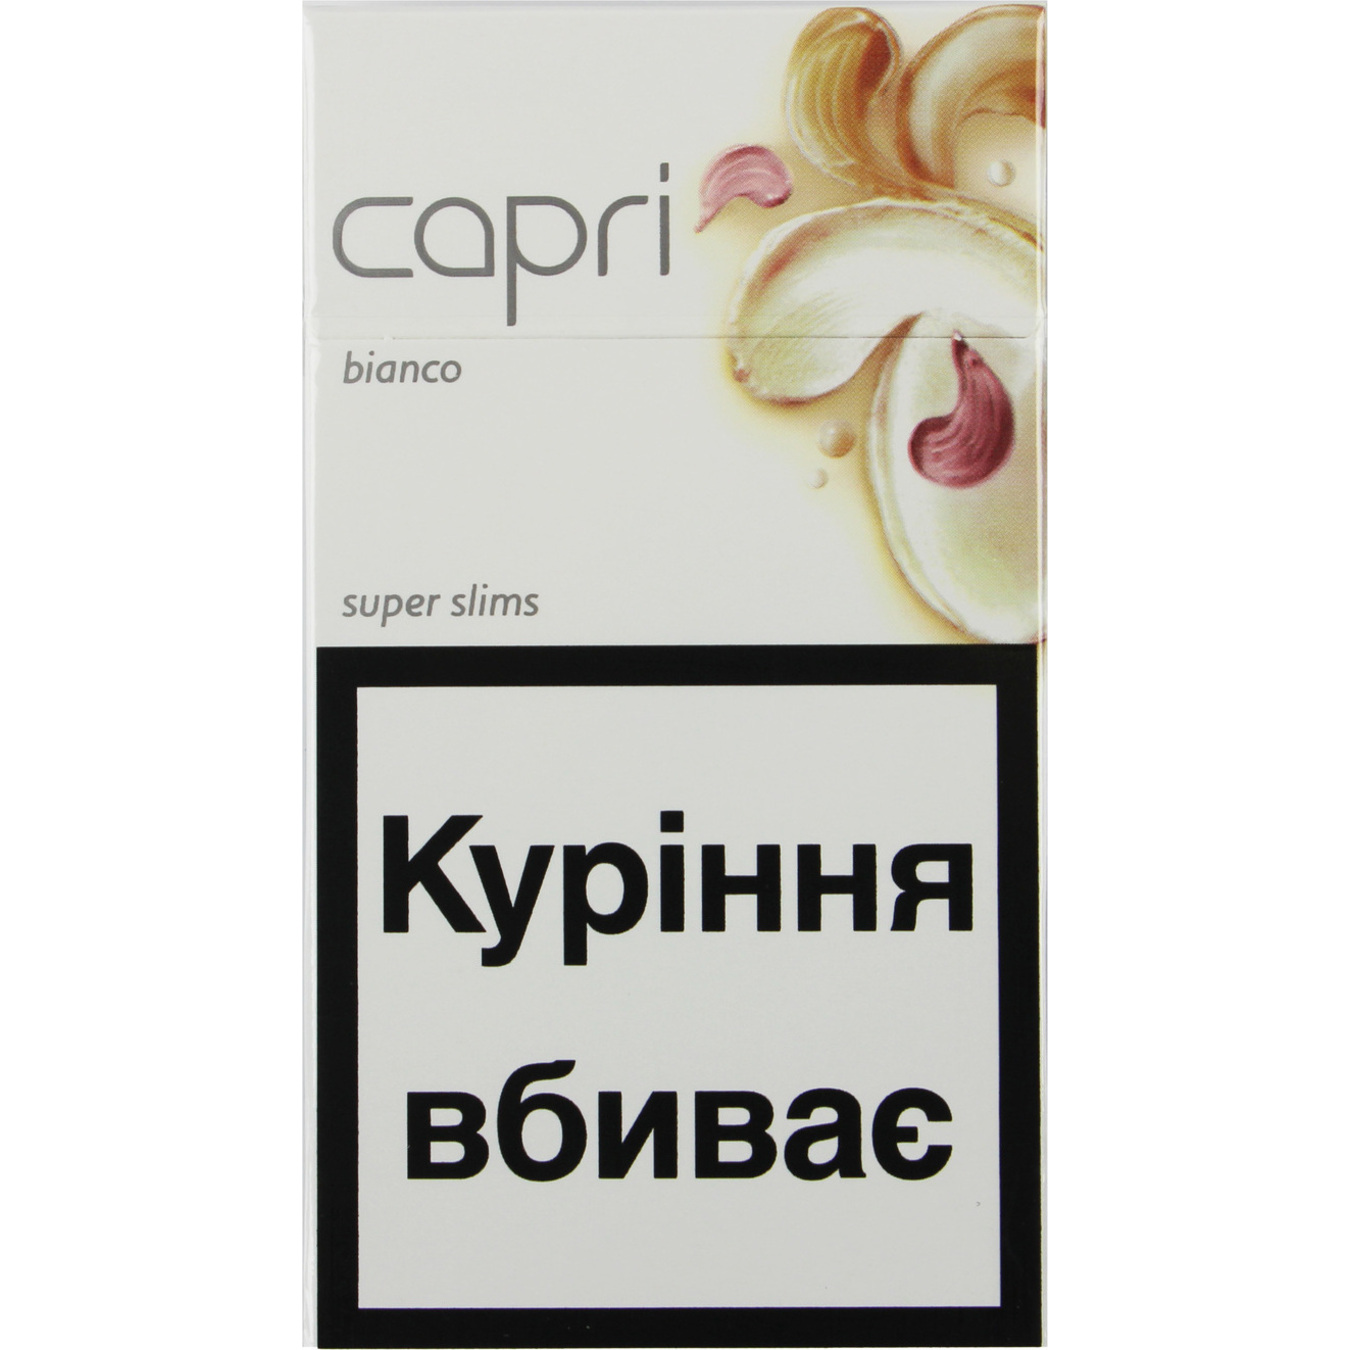 Capri Bianco Cigarette 20 pcs (the price is indicated without excise tax)